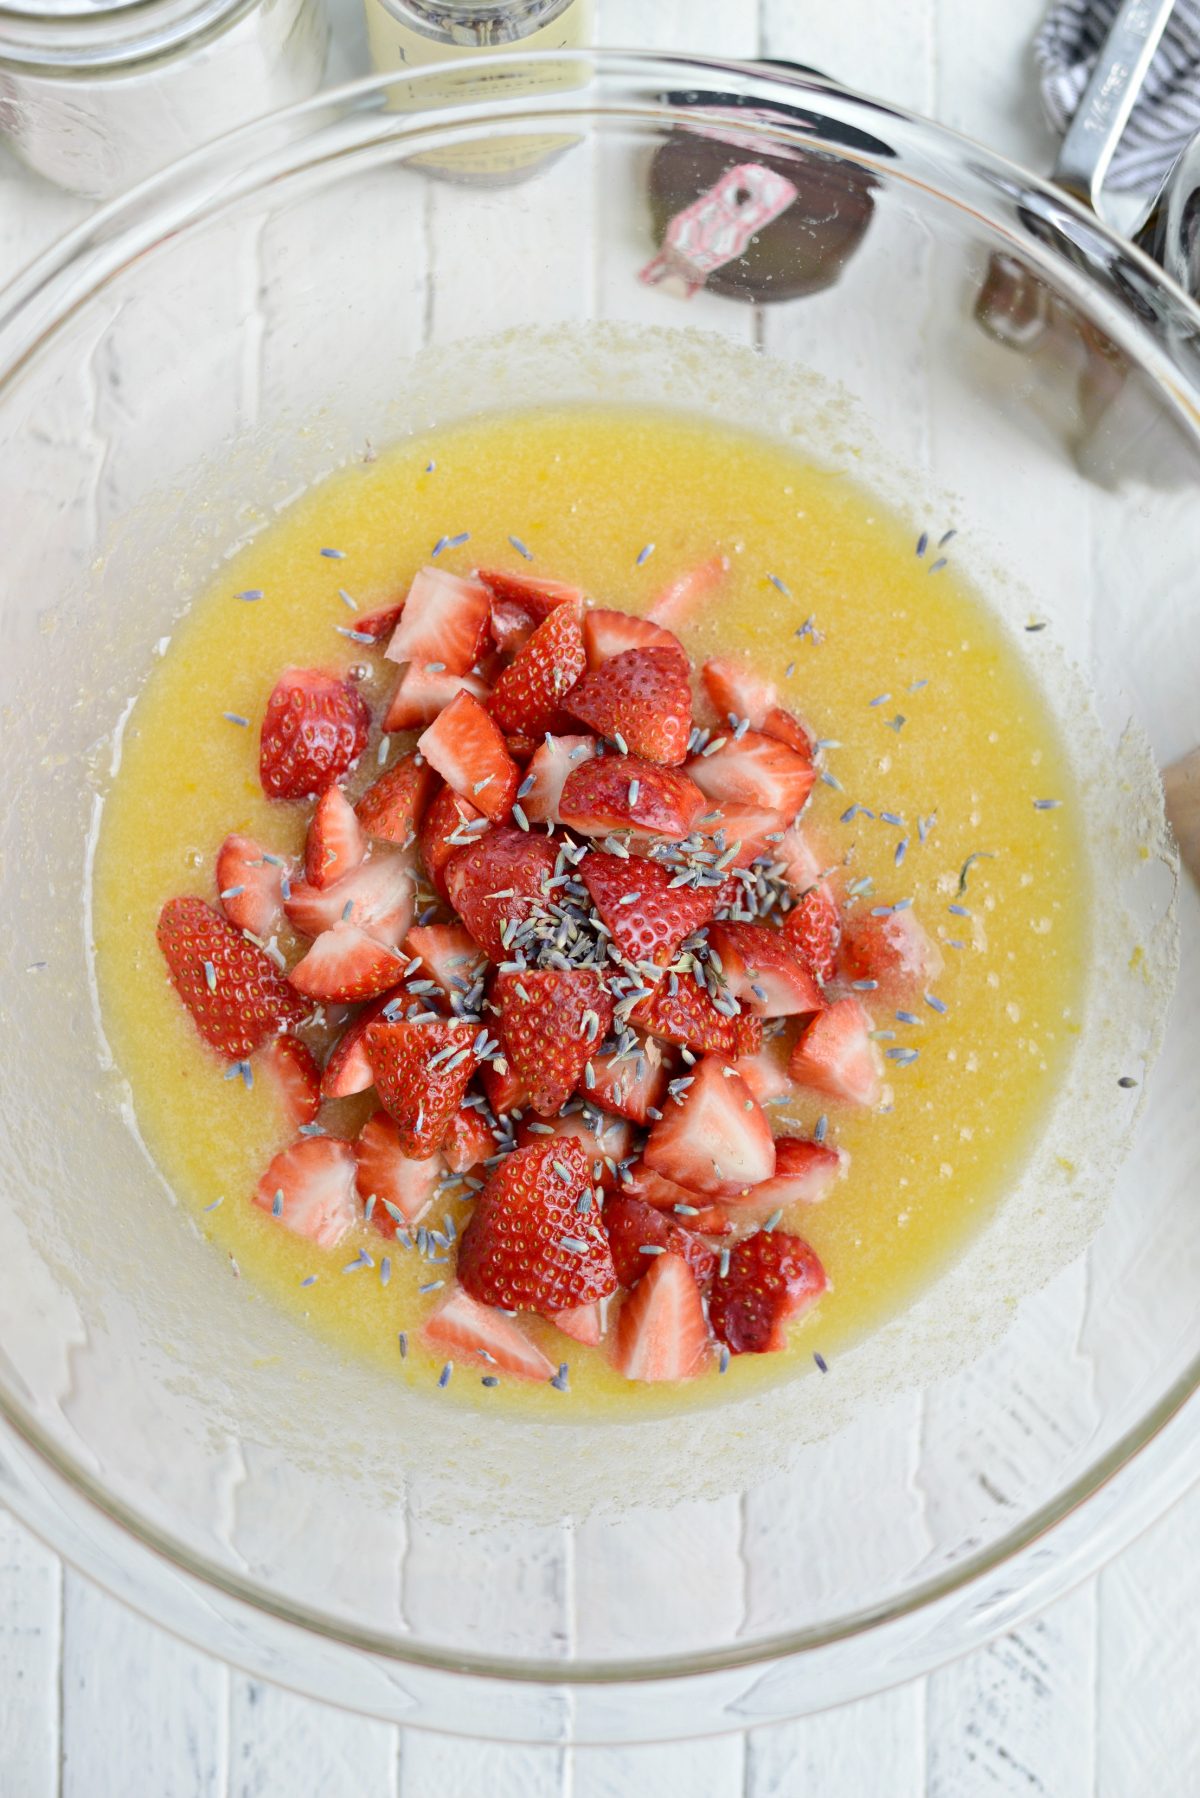 add strawberry and lavender to the bowl